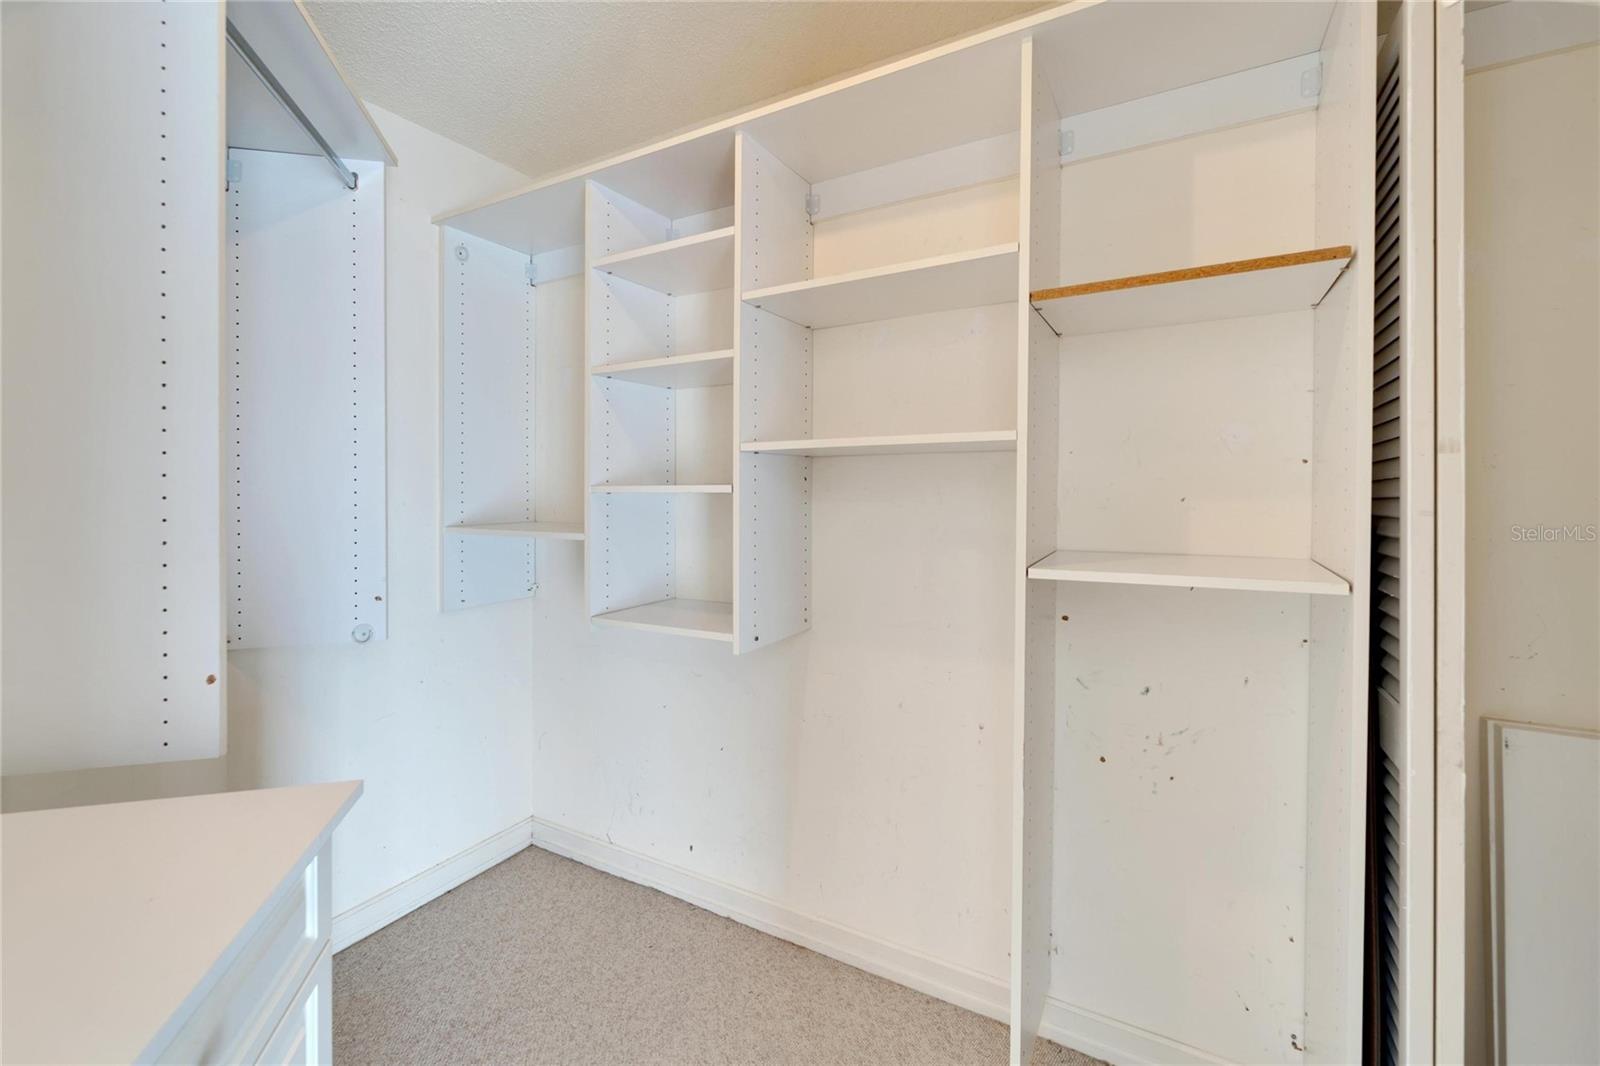 GREAT STORAGE AND SHELVING IN THE 2ND BEDROOM